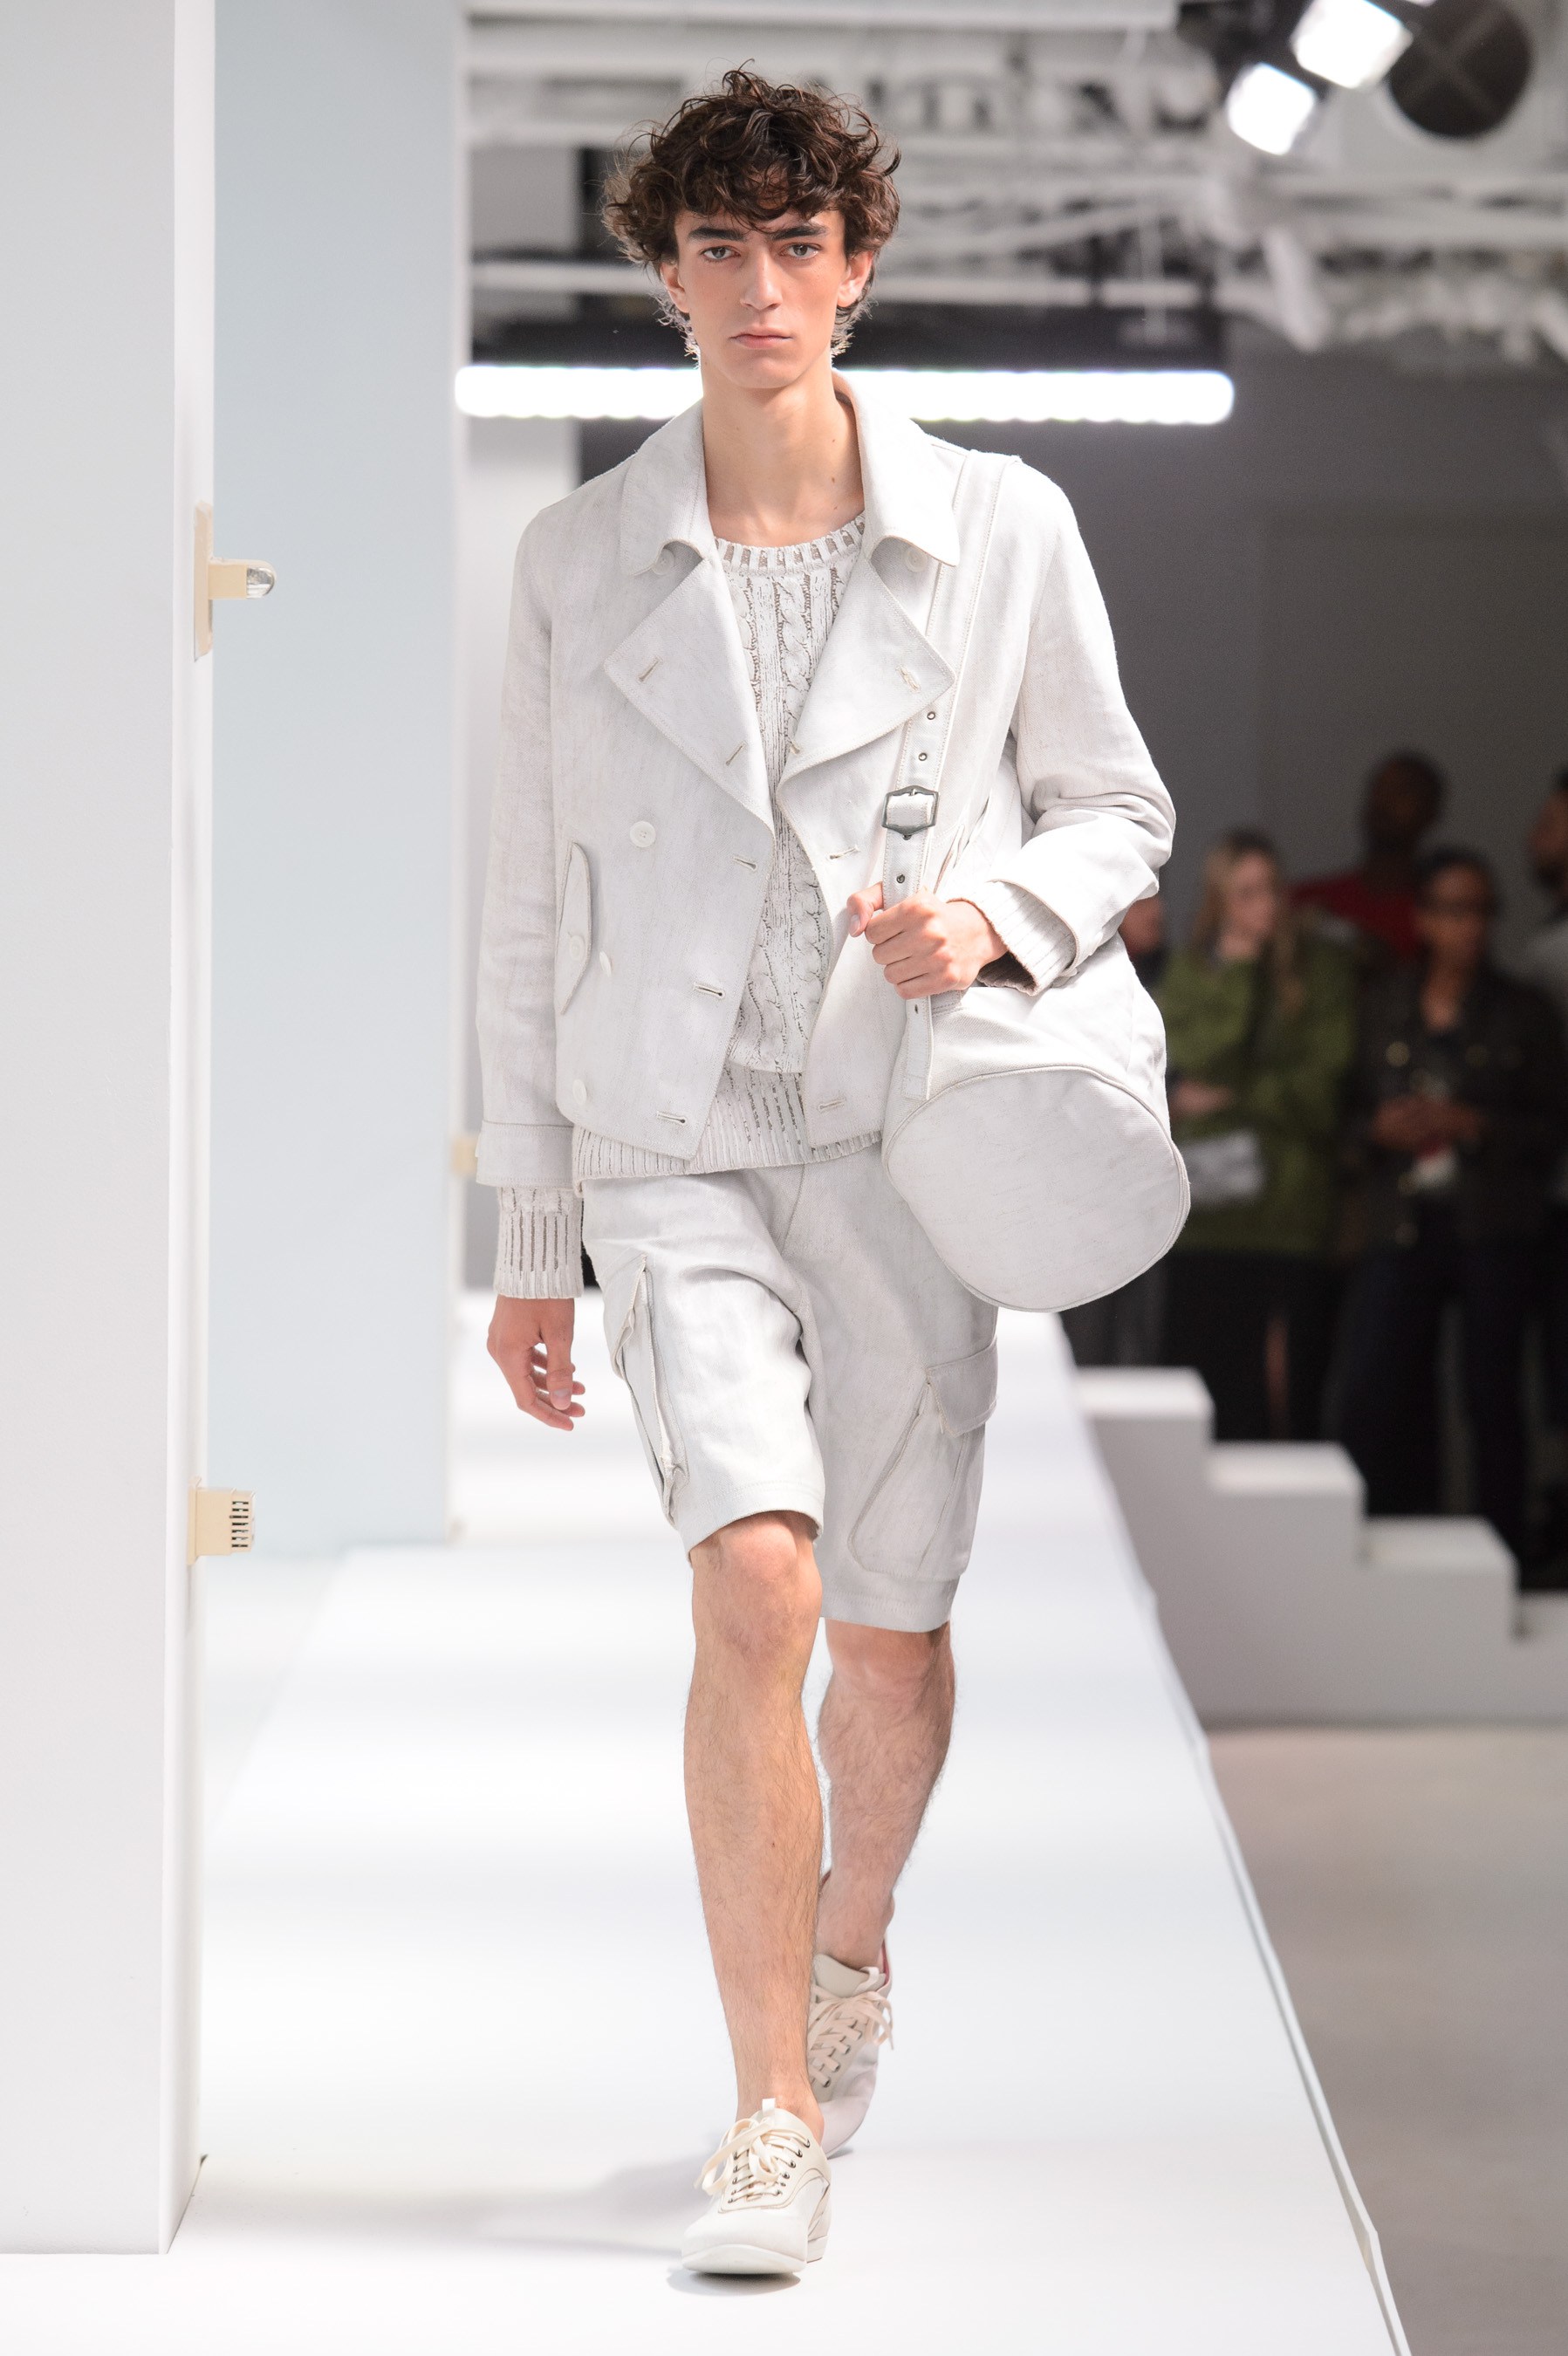 Top 10 Other Spring 2019 Collections and Fashion Shows - The Impression